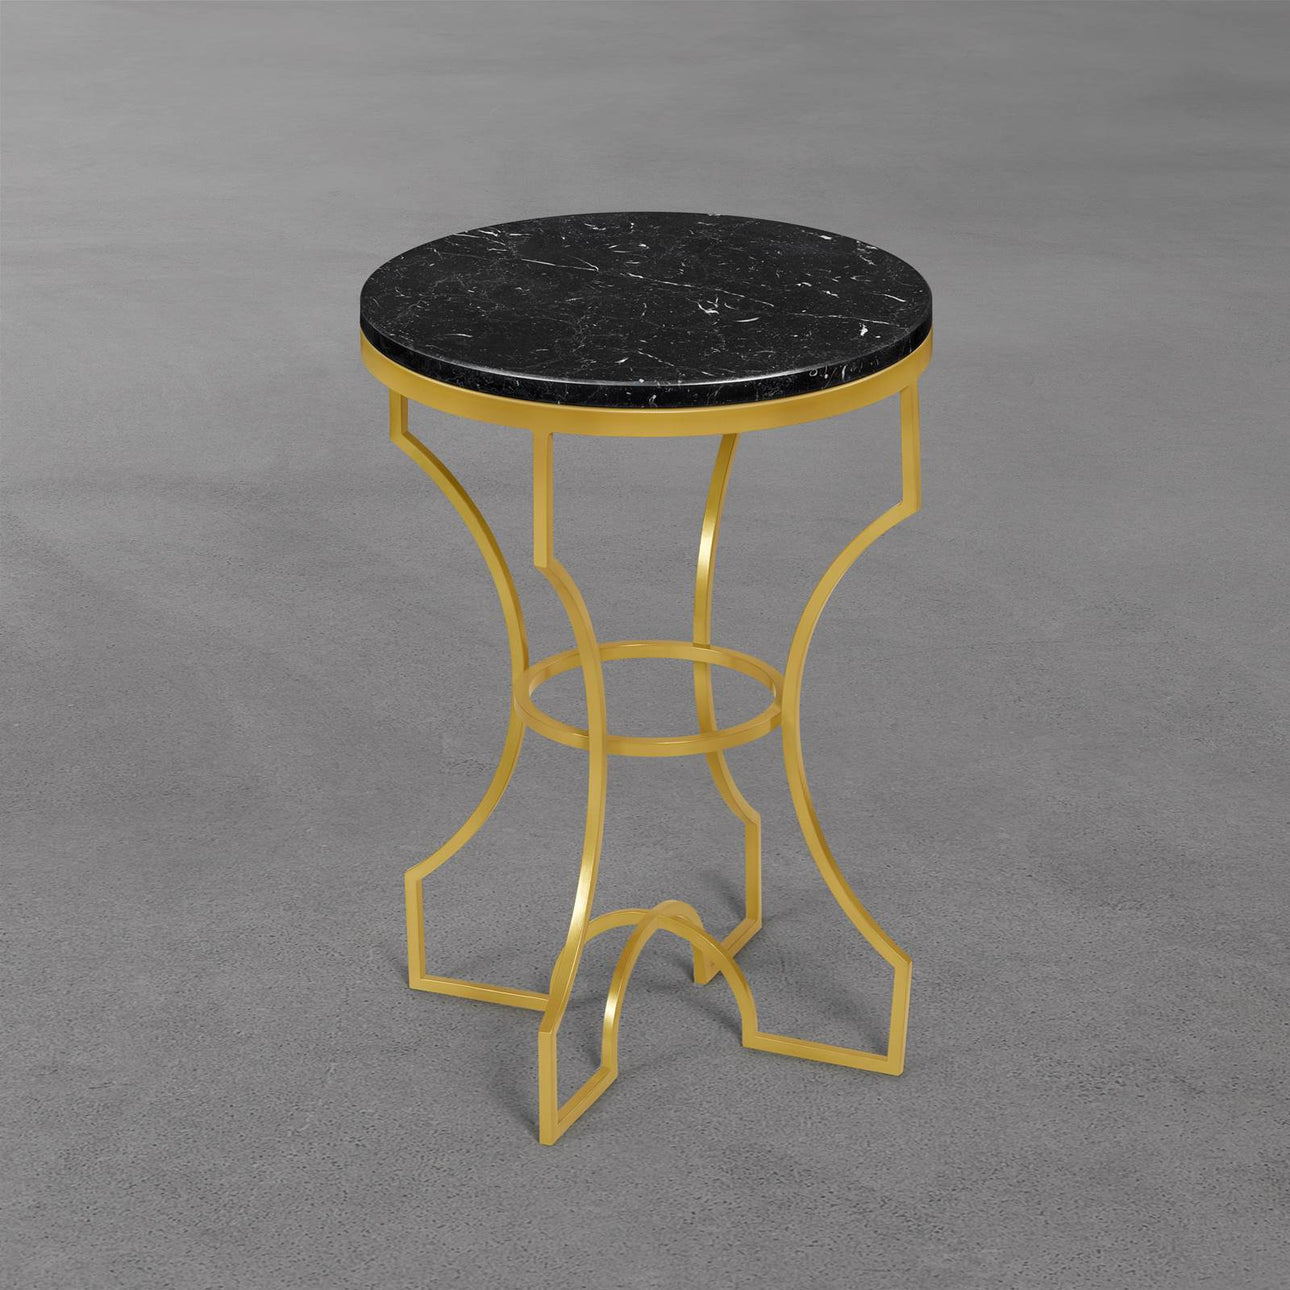 Porto marble side table